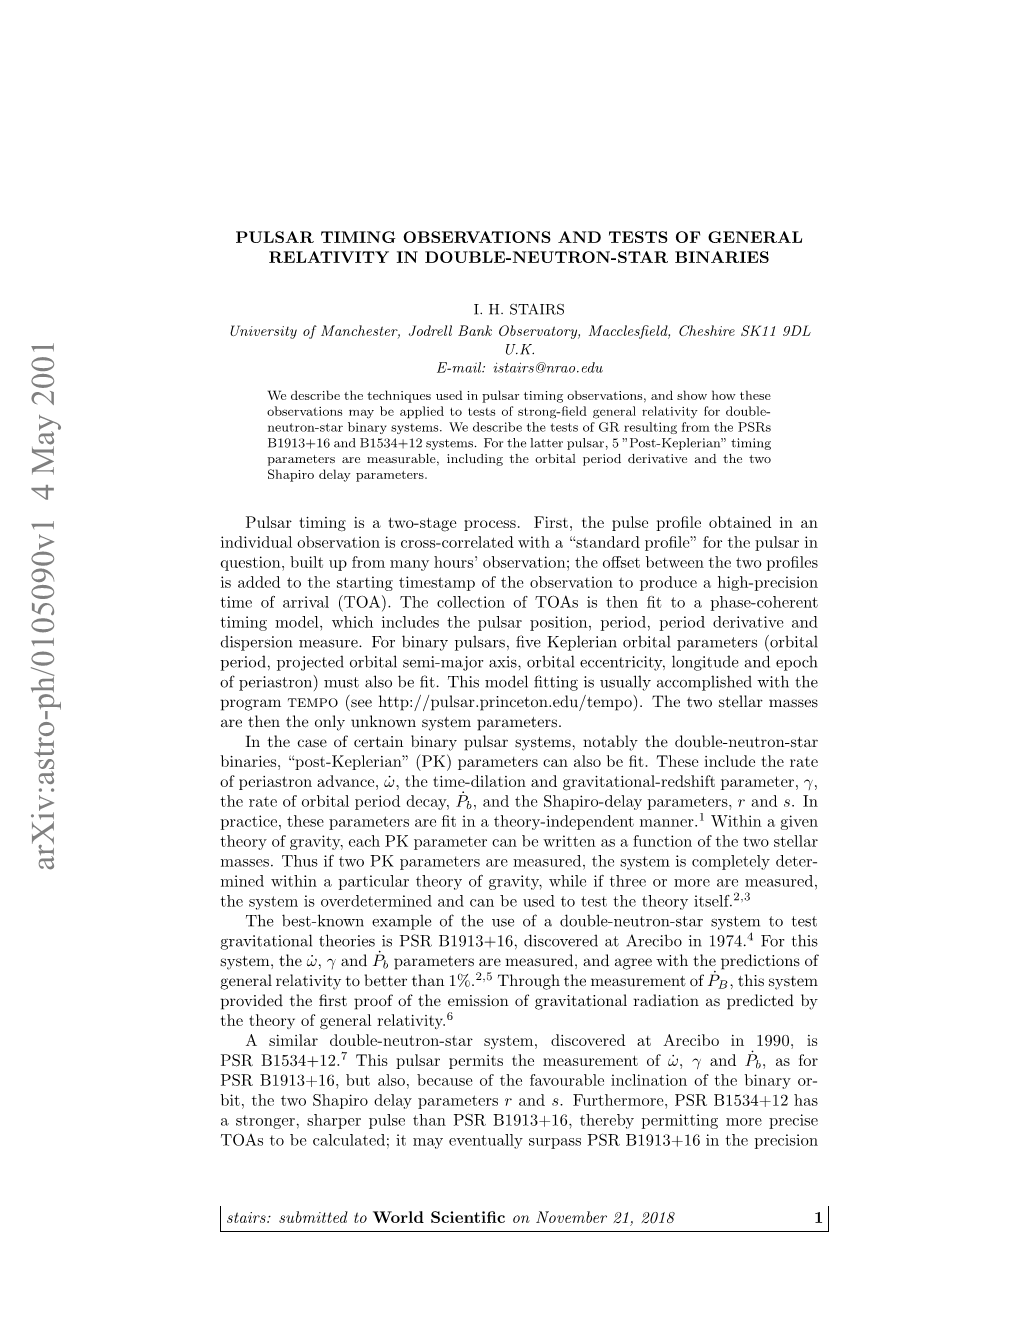 Pulsar Timing Observations and Tests of General Relativity in Double